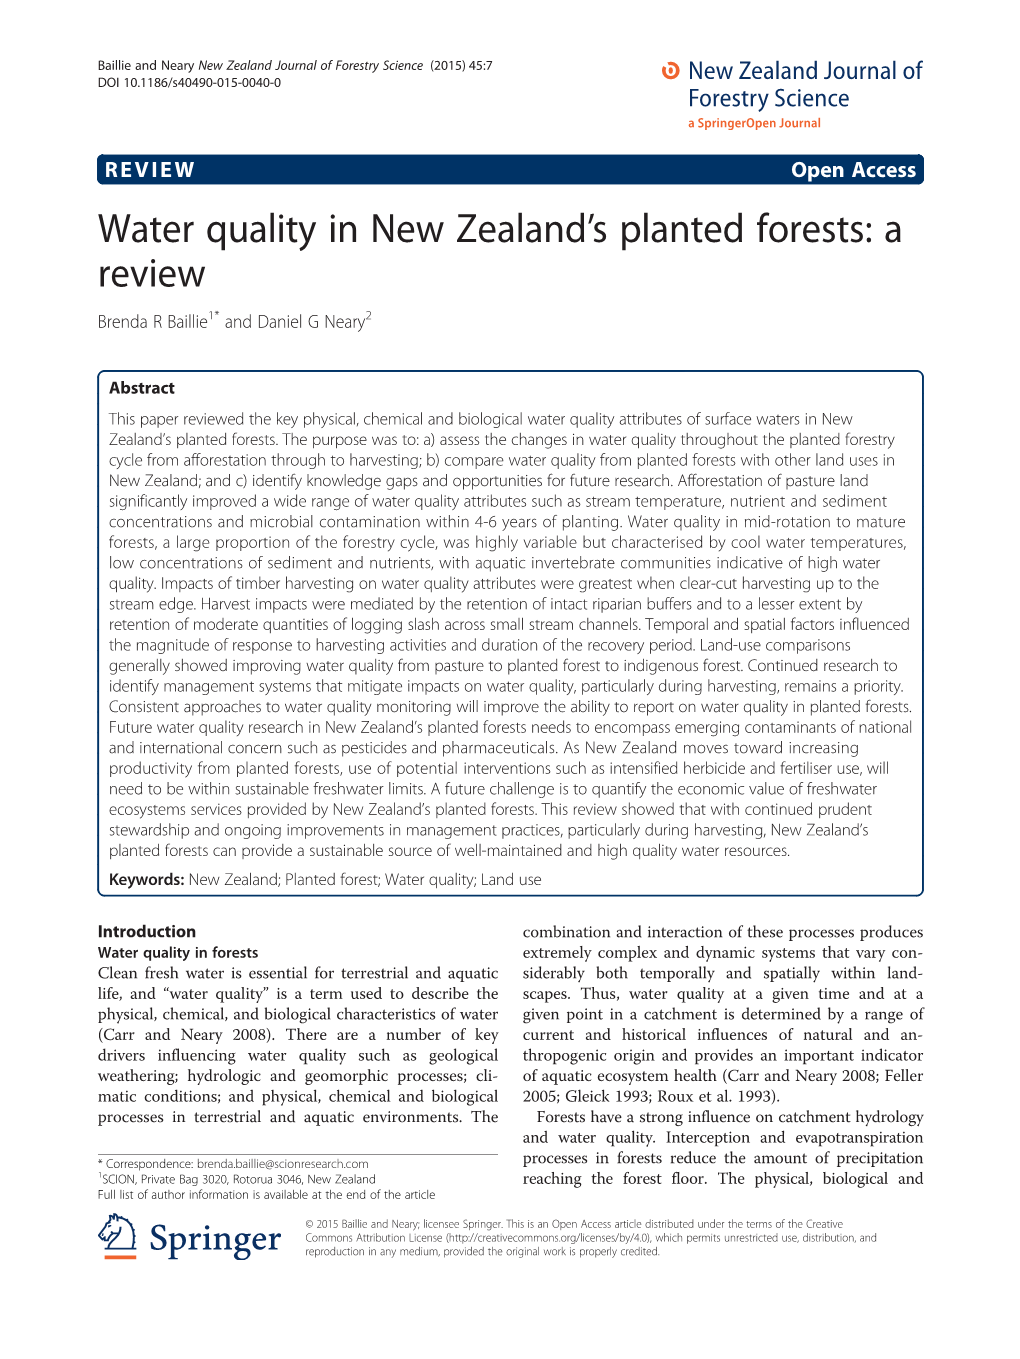 Water Quality in New Zealand's Planted Forests: a Review